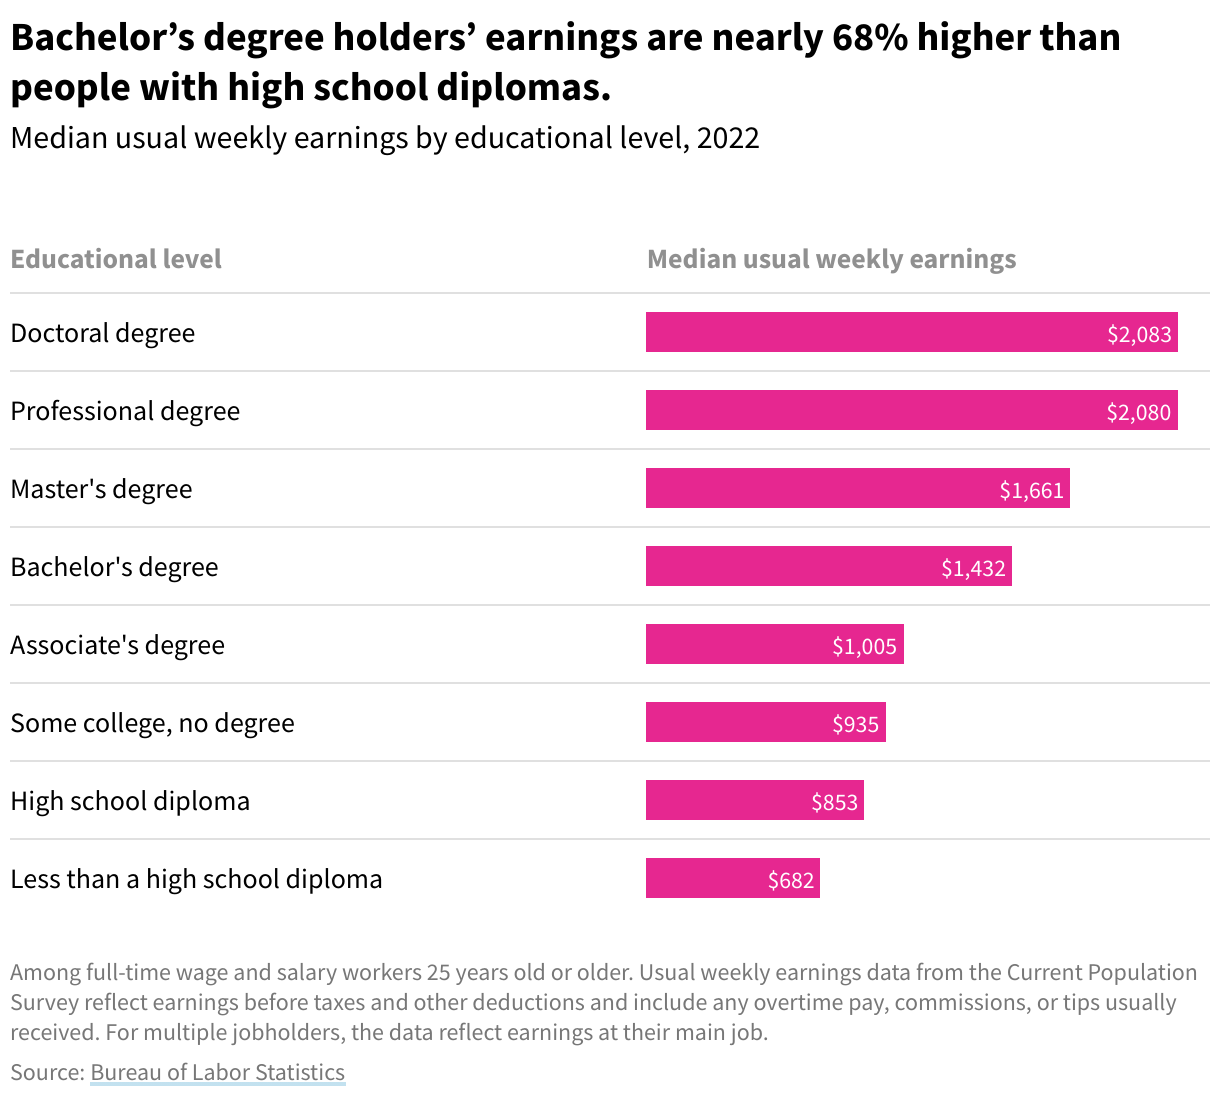 Bar graph showing median usual weekly earnings by educational attainment in 2022. Bachelor’s degree holders’ earnings are nearly 68% higher than people with high school diplomas.